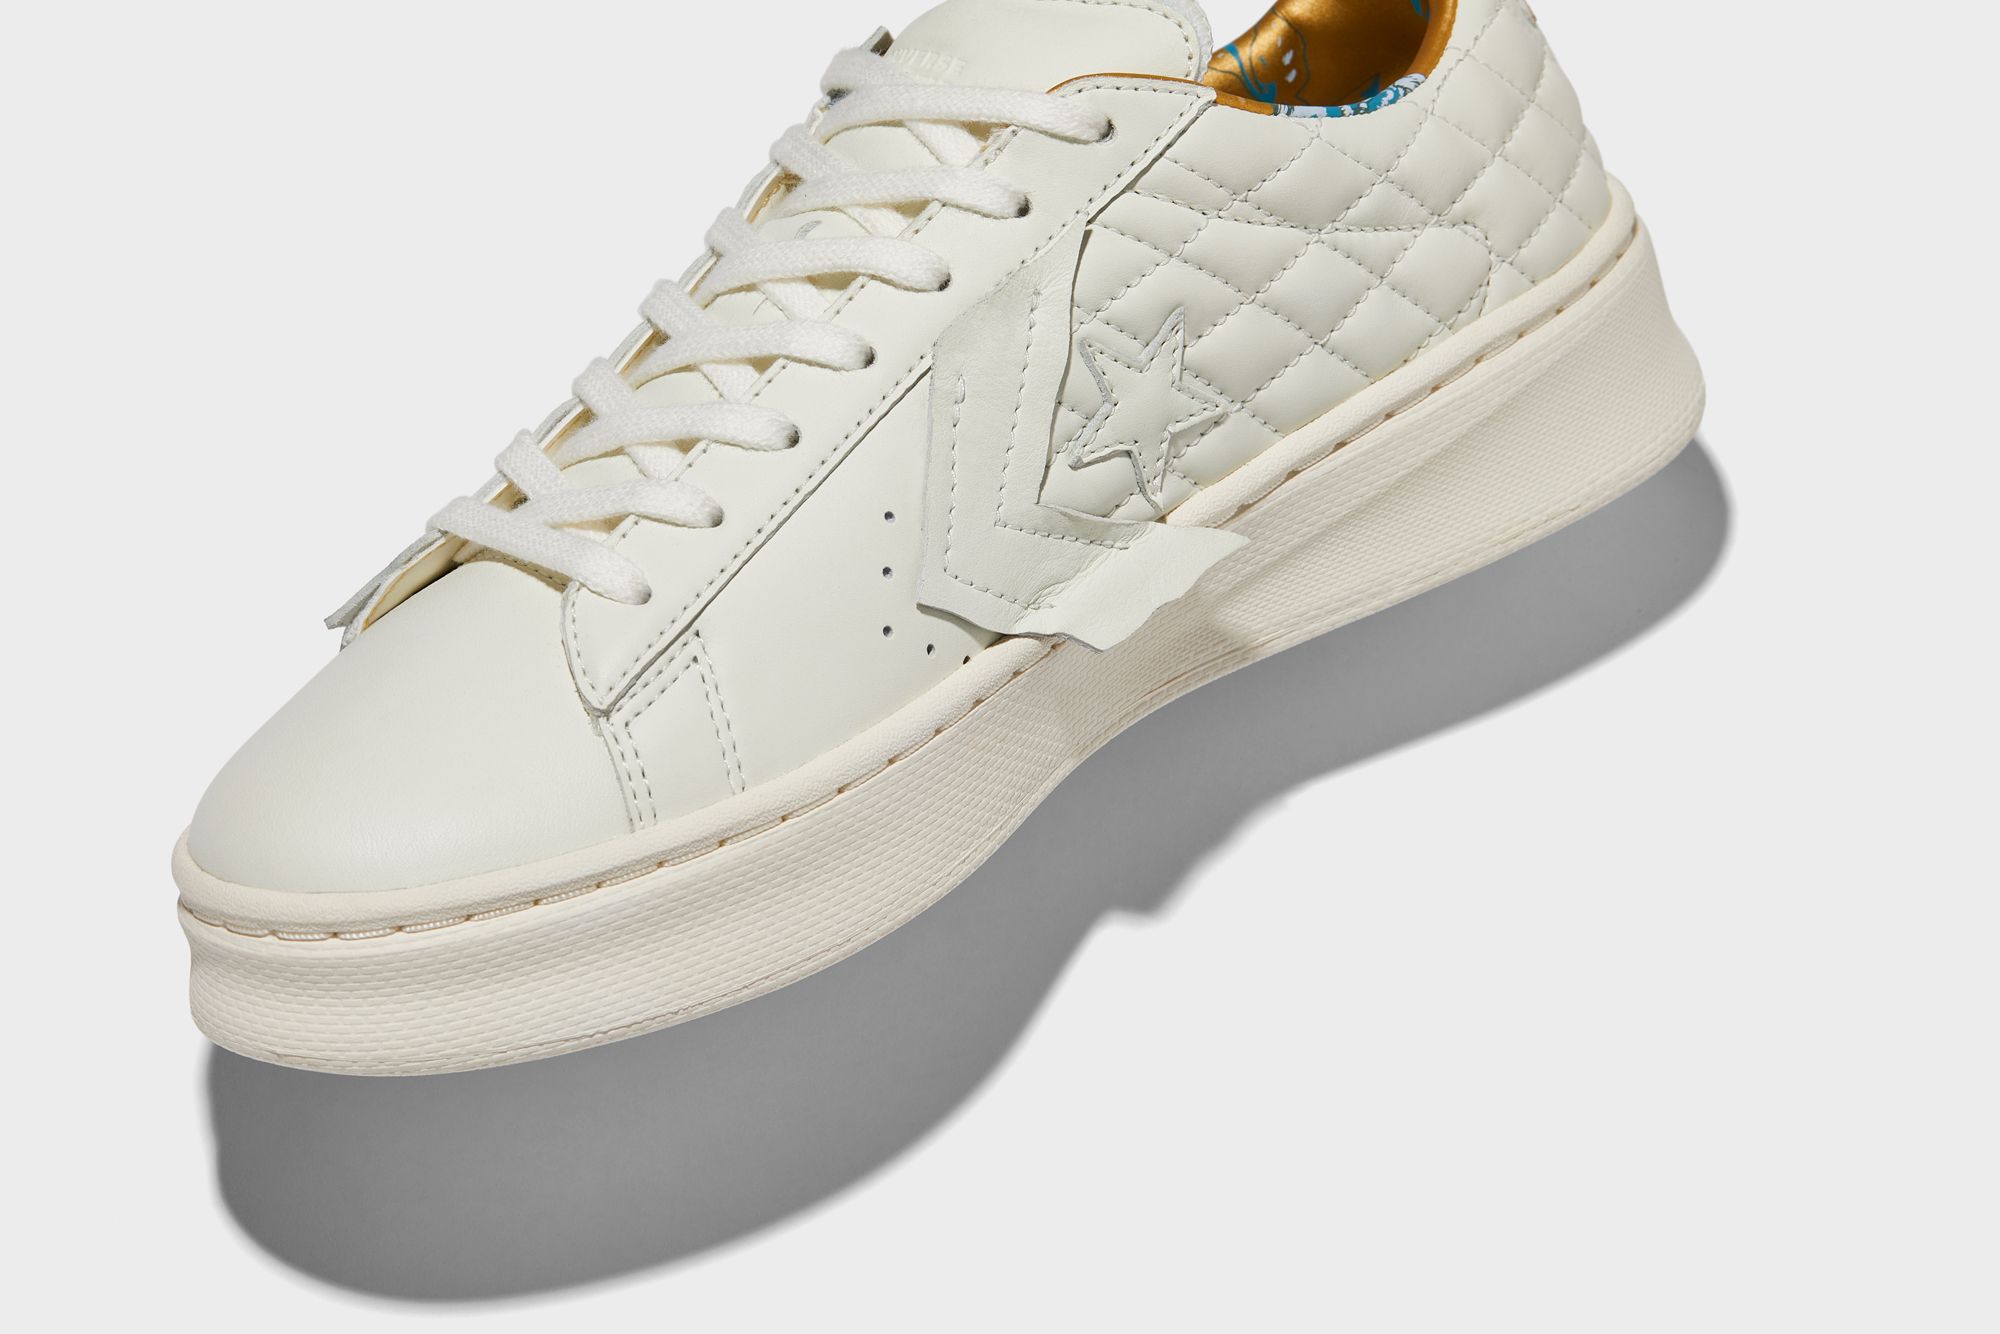 Shai Gilgeous-Alexander x Converse Pro Leather 'Chase the Drip'